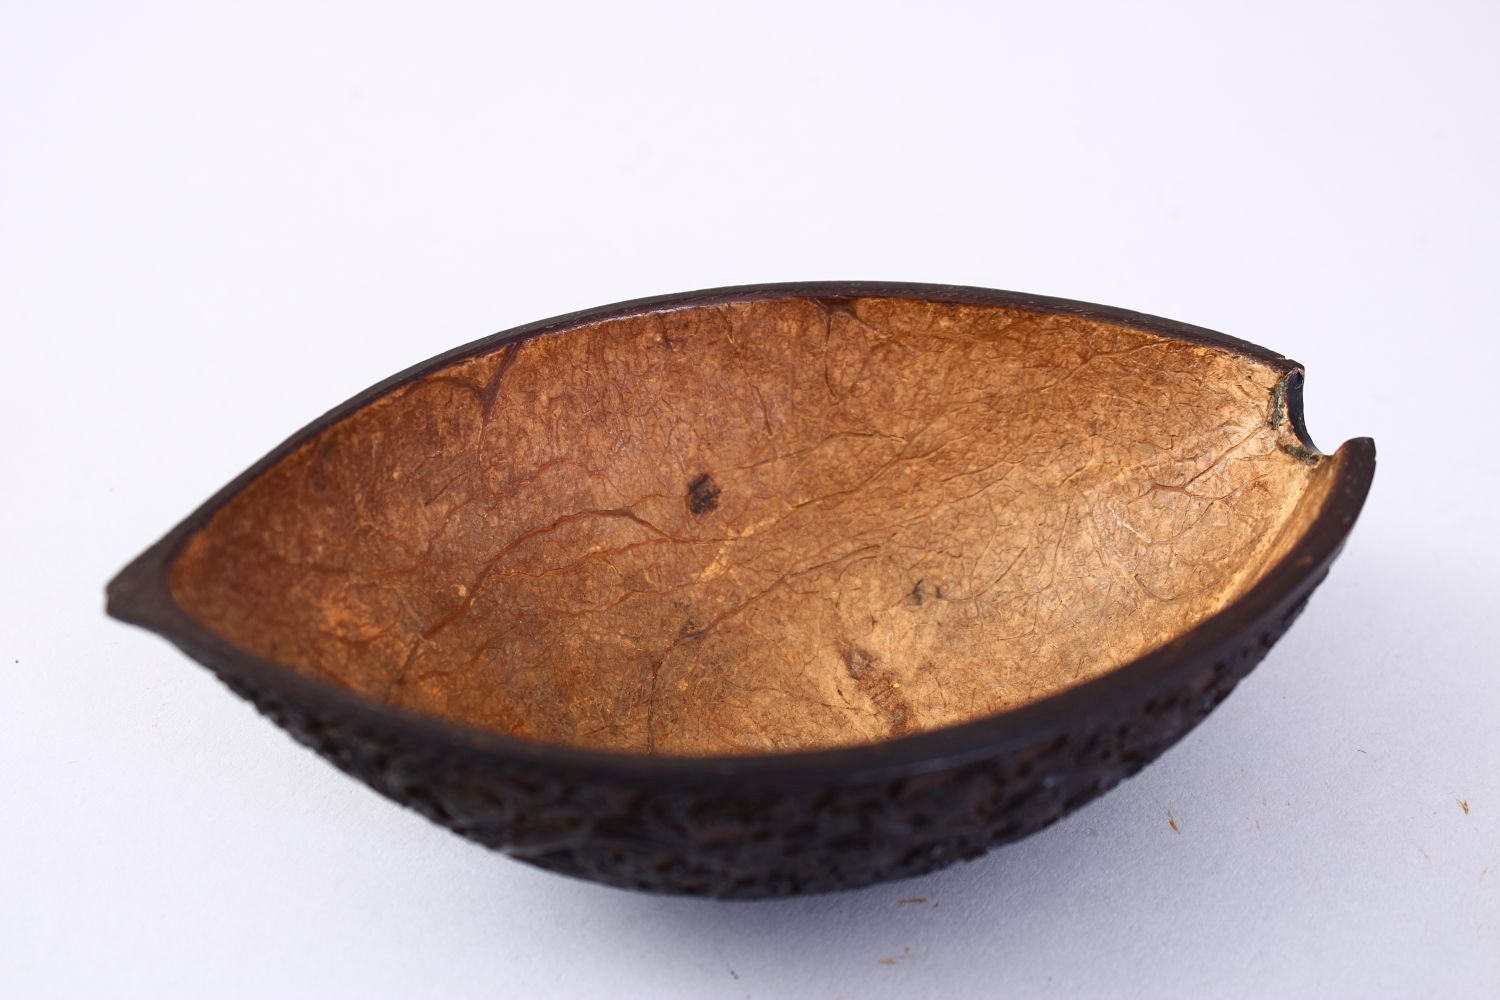 A FINE 18TH CENTURY CEYLONESE DUTCH COLONIAL COCONUT CUP, with finely carved foliate decoration, - Image 7 of 7